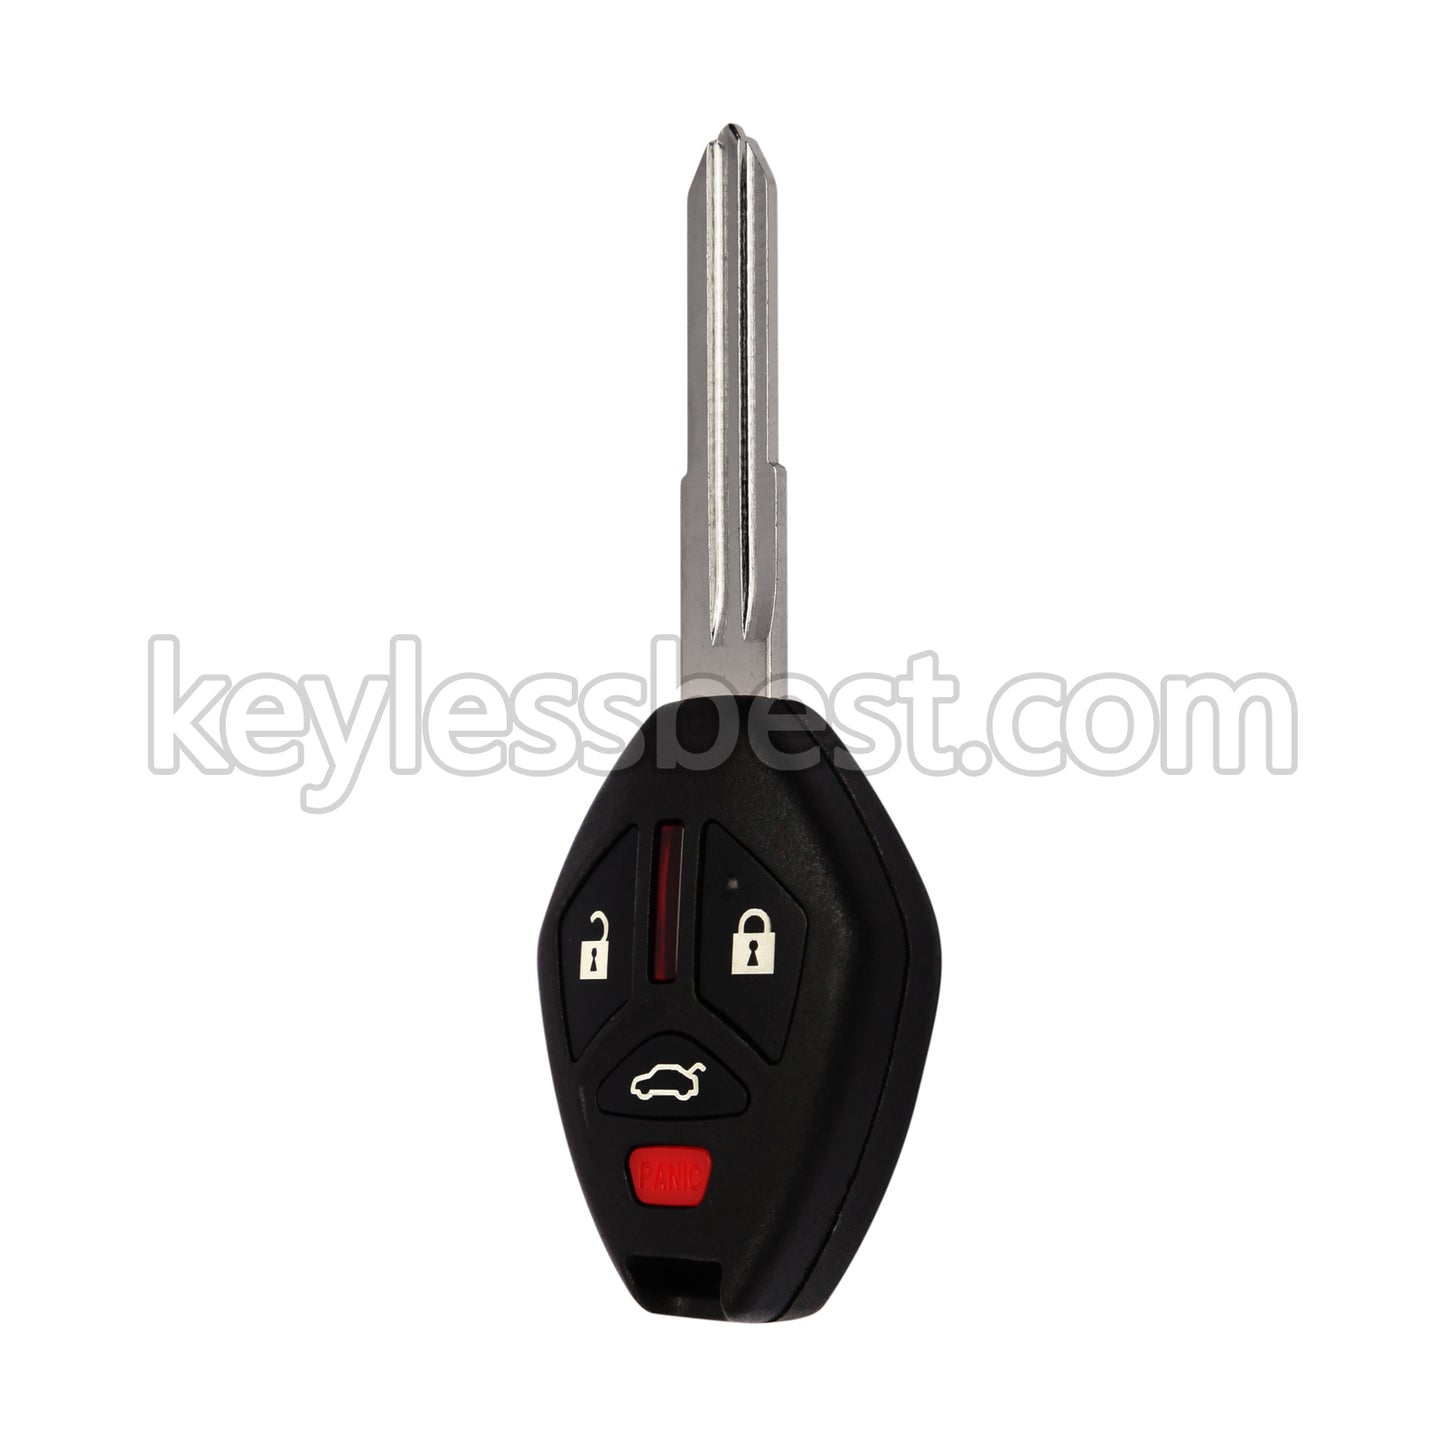 2007 - 2012 Mitsubishi Eclipse Galant / 4 Buttons Remote Key / OUCG8D-620M-A / 315MHz